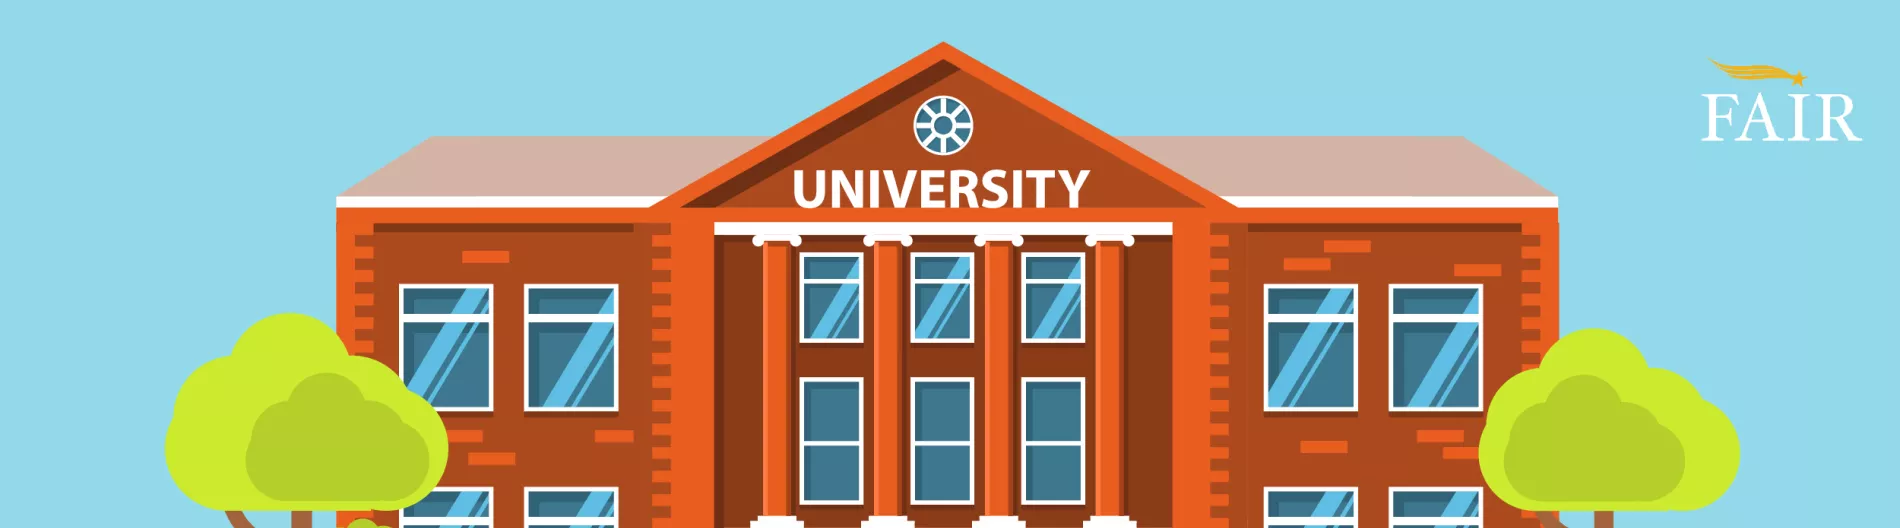 Cartoon picture of a university